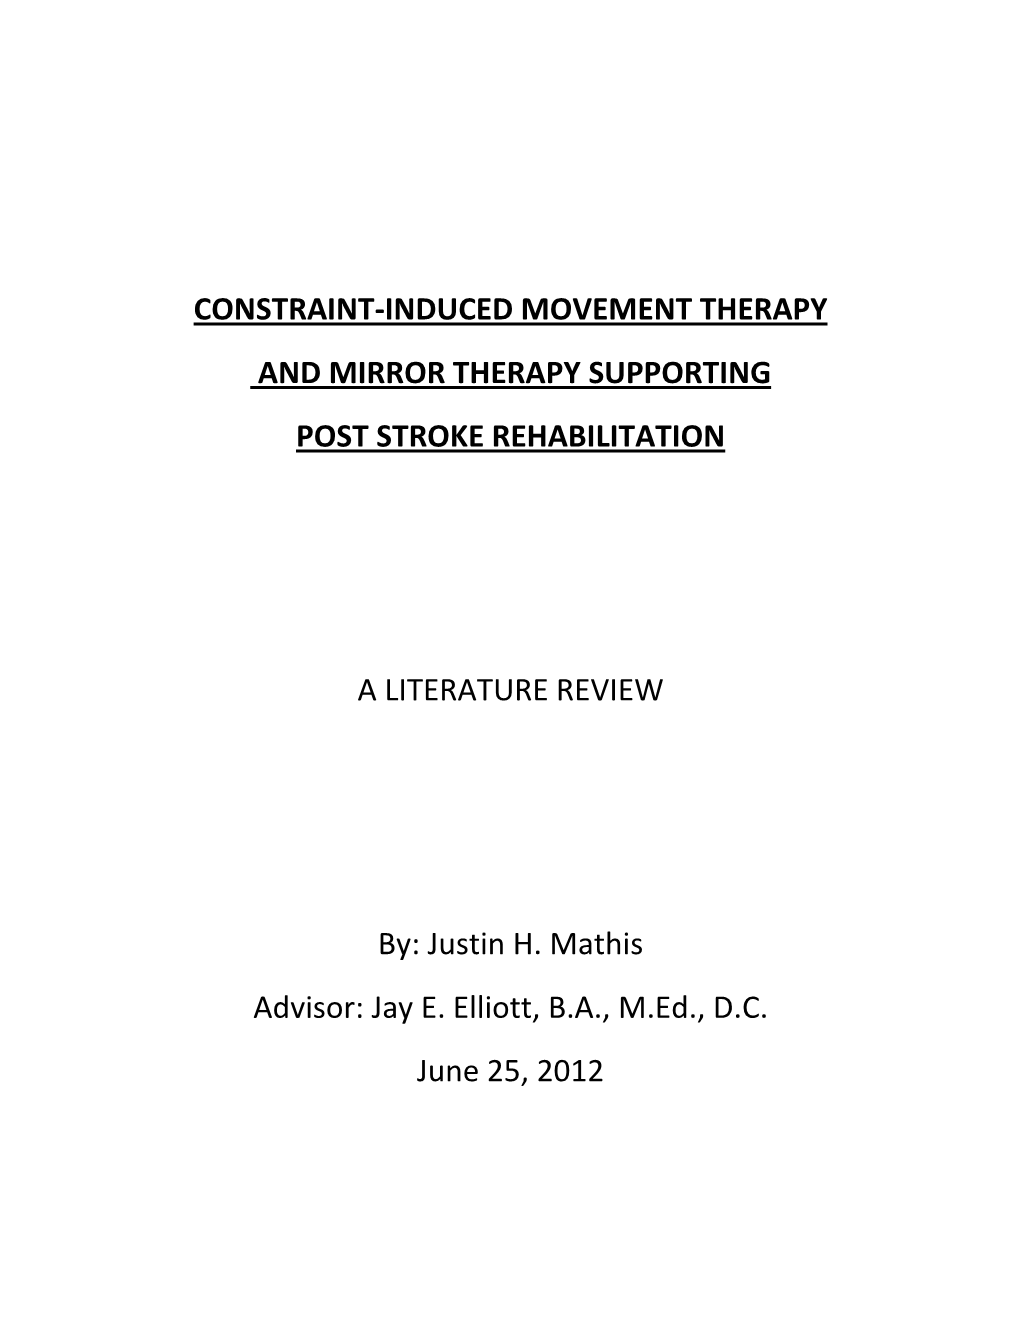 Constraint-Induced Movement Therapy and Mirror Therapy Supporting Post Stroke Rehabilitation